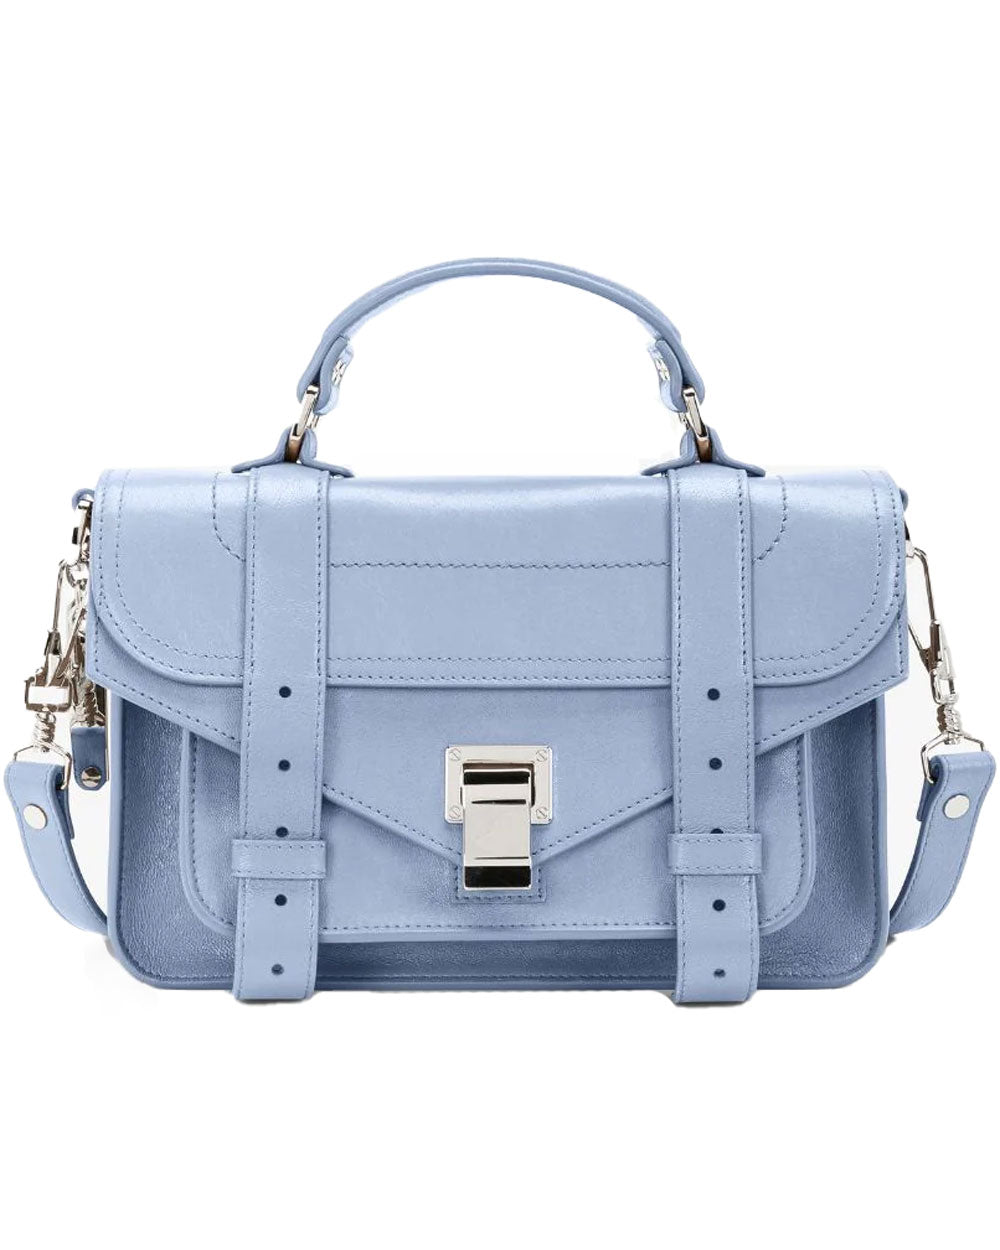 PS1 Tiny Proenza Schouler Bag in Leather